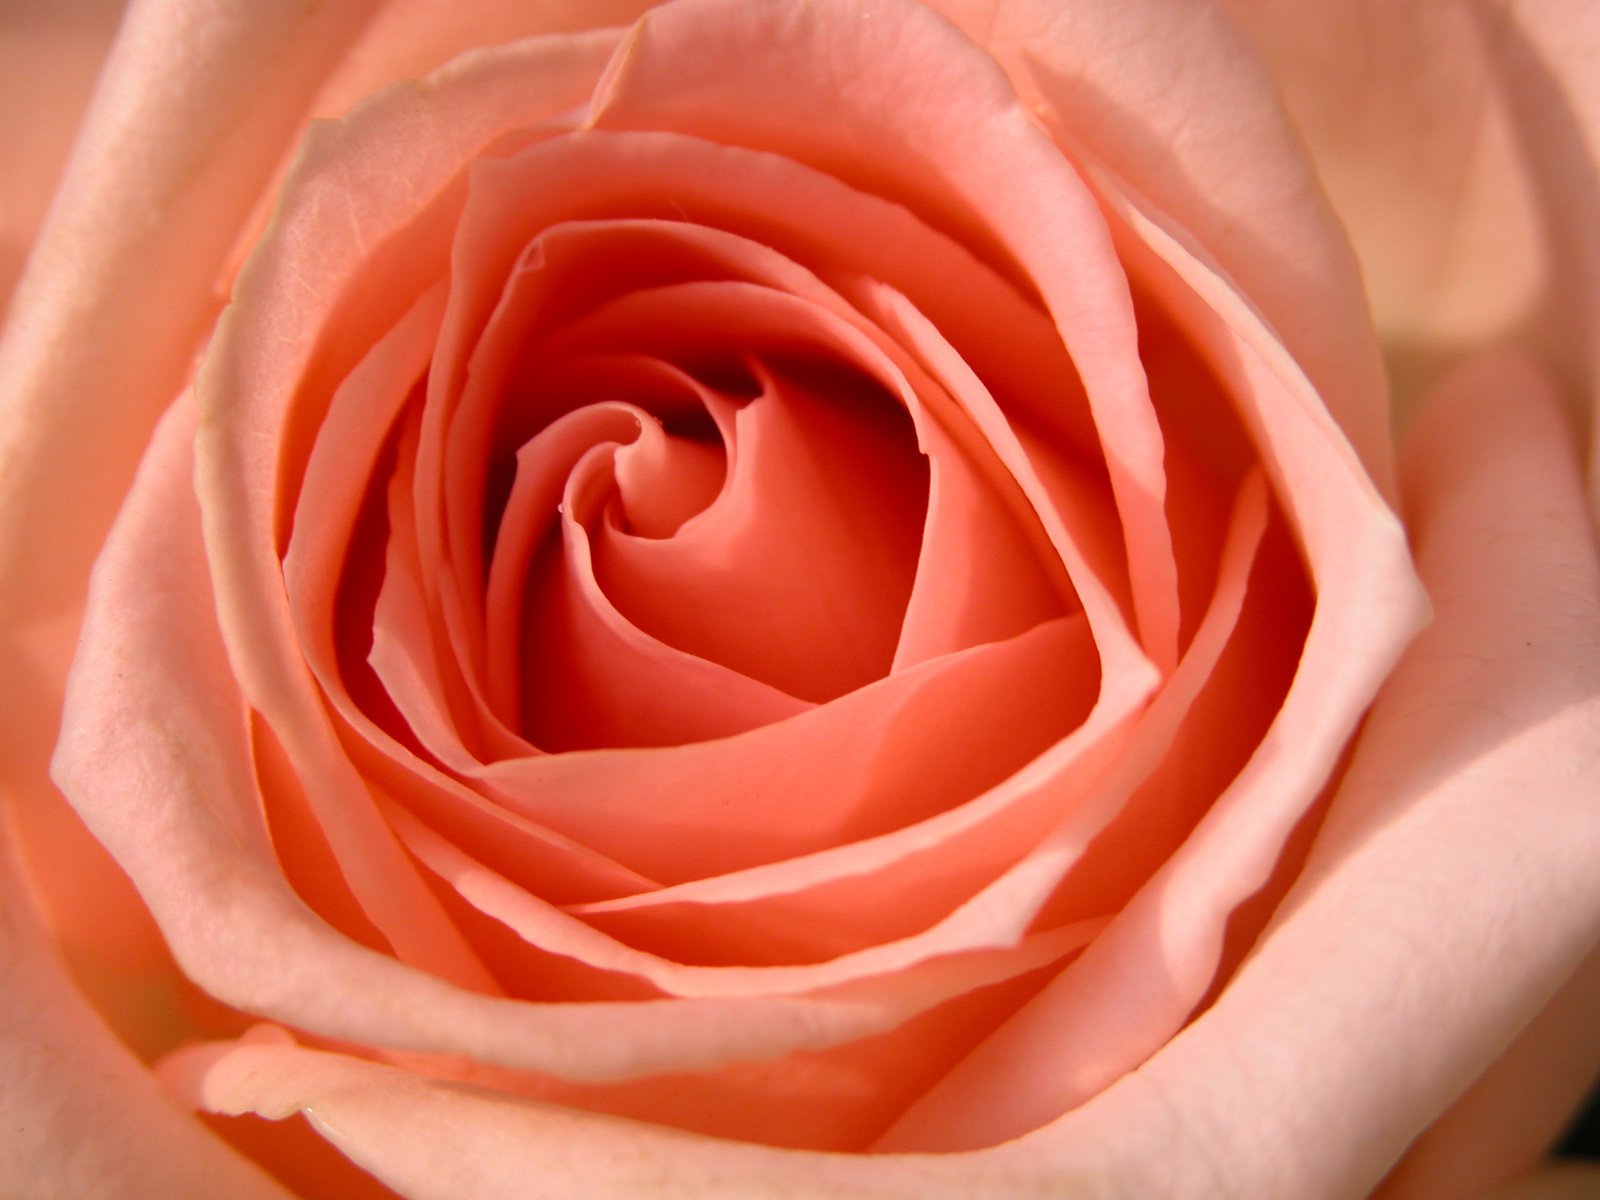 a close up s of an orange rose that's very pretty